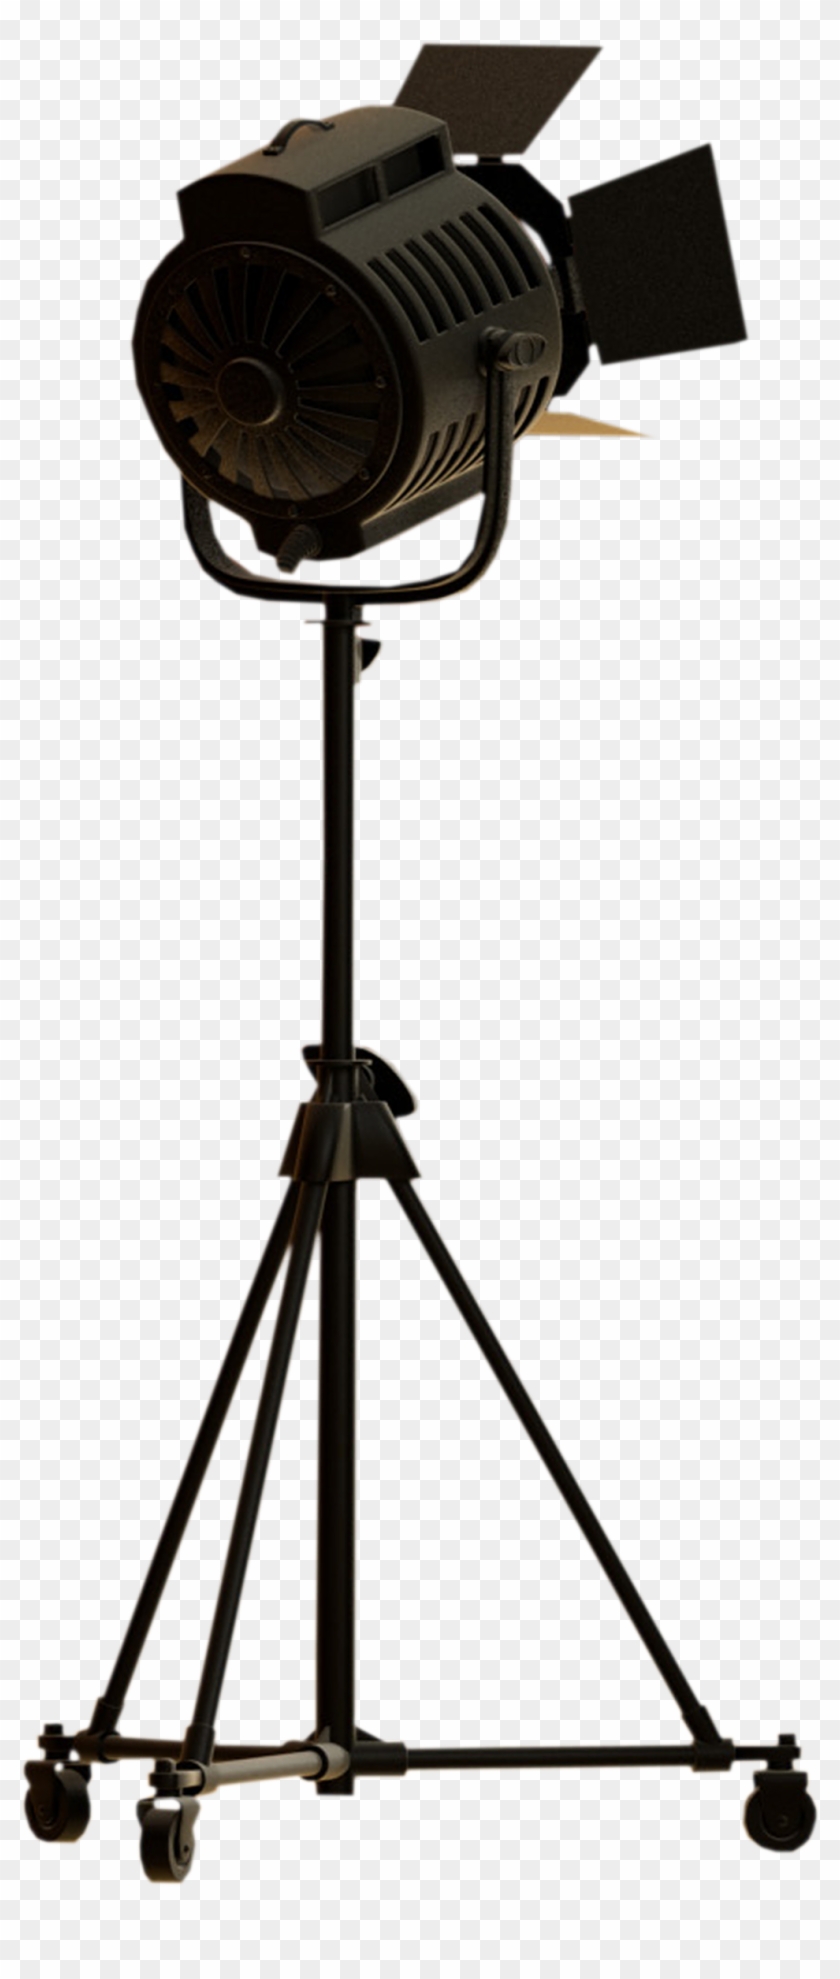 Searchlight Clip Art - Spotlight Stand Png #302643